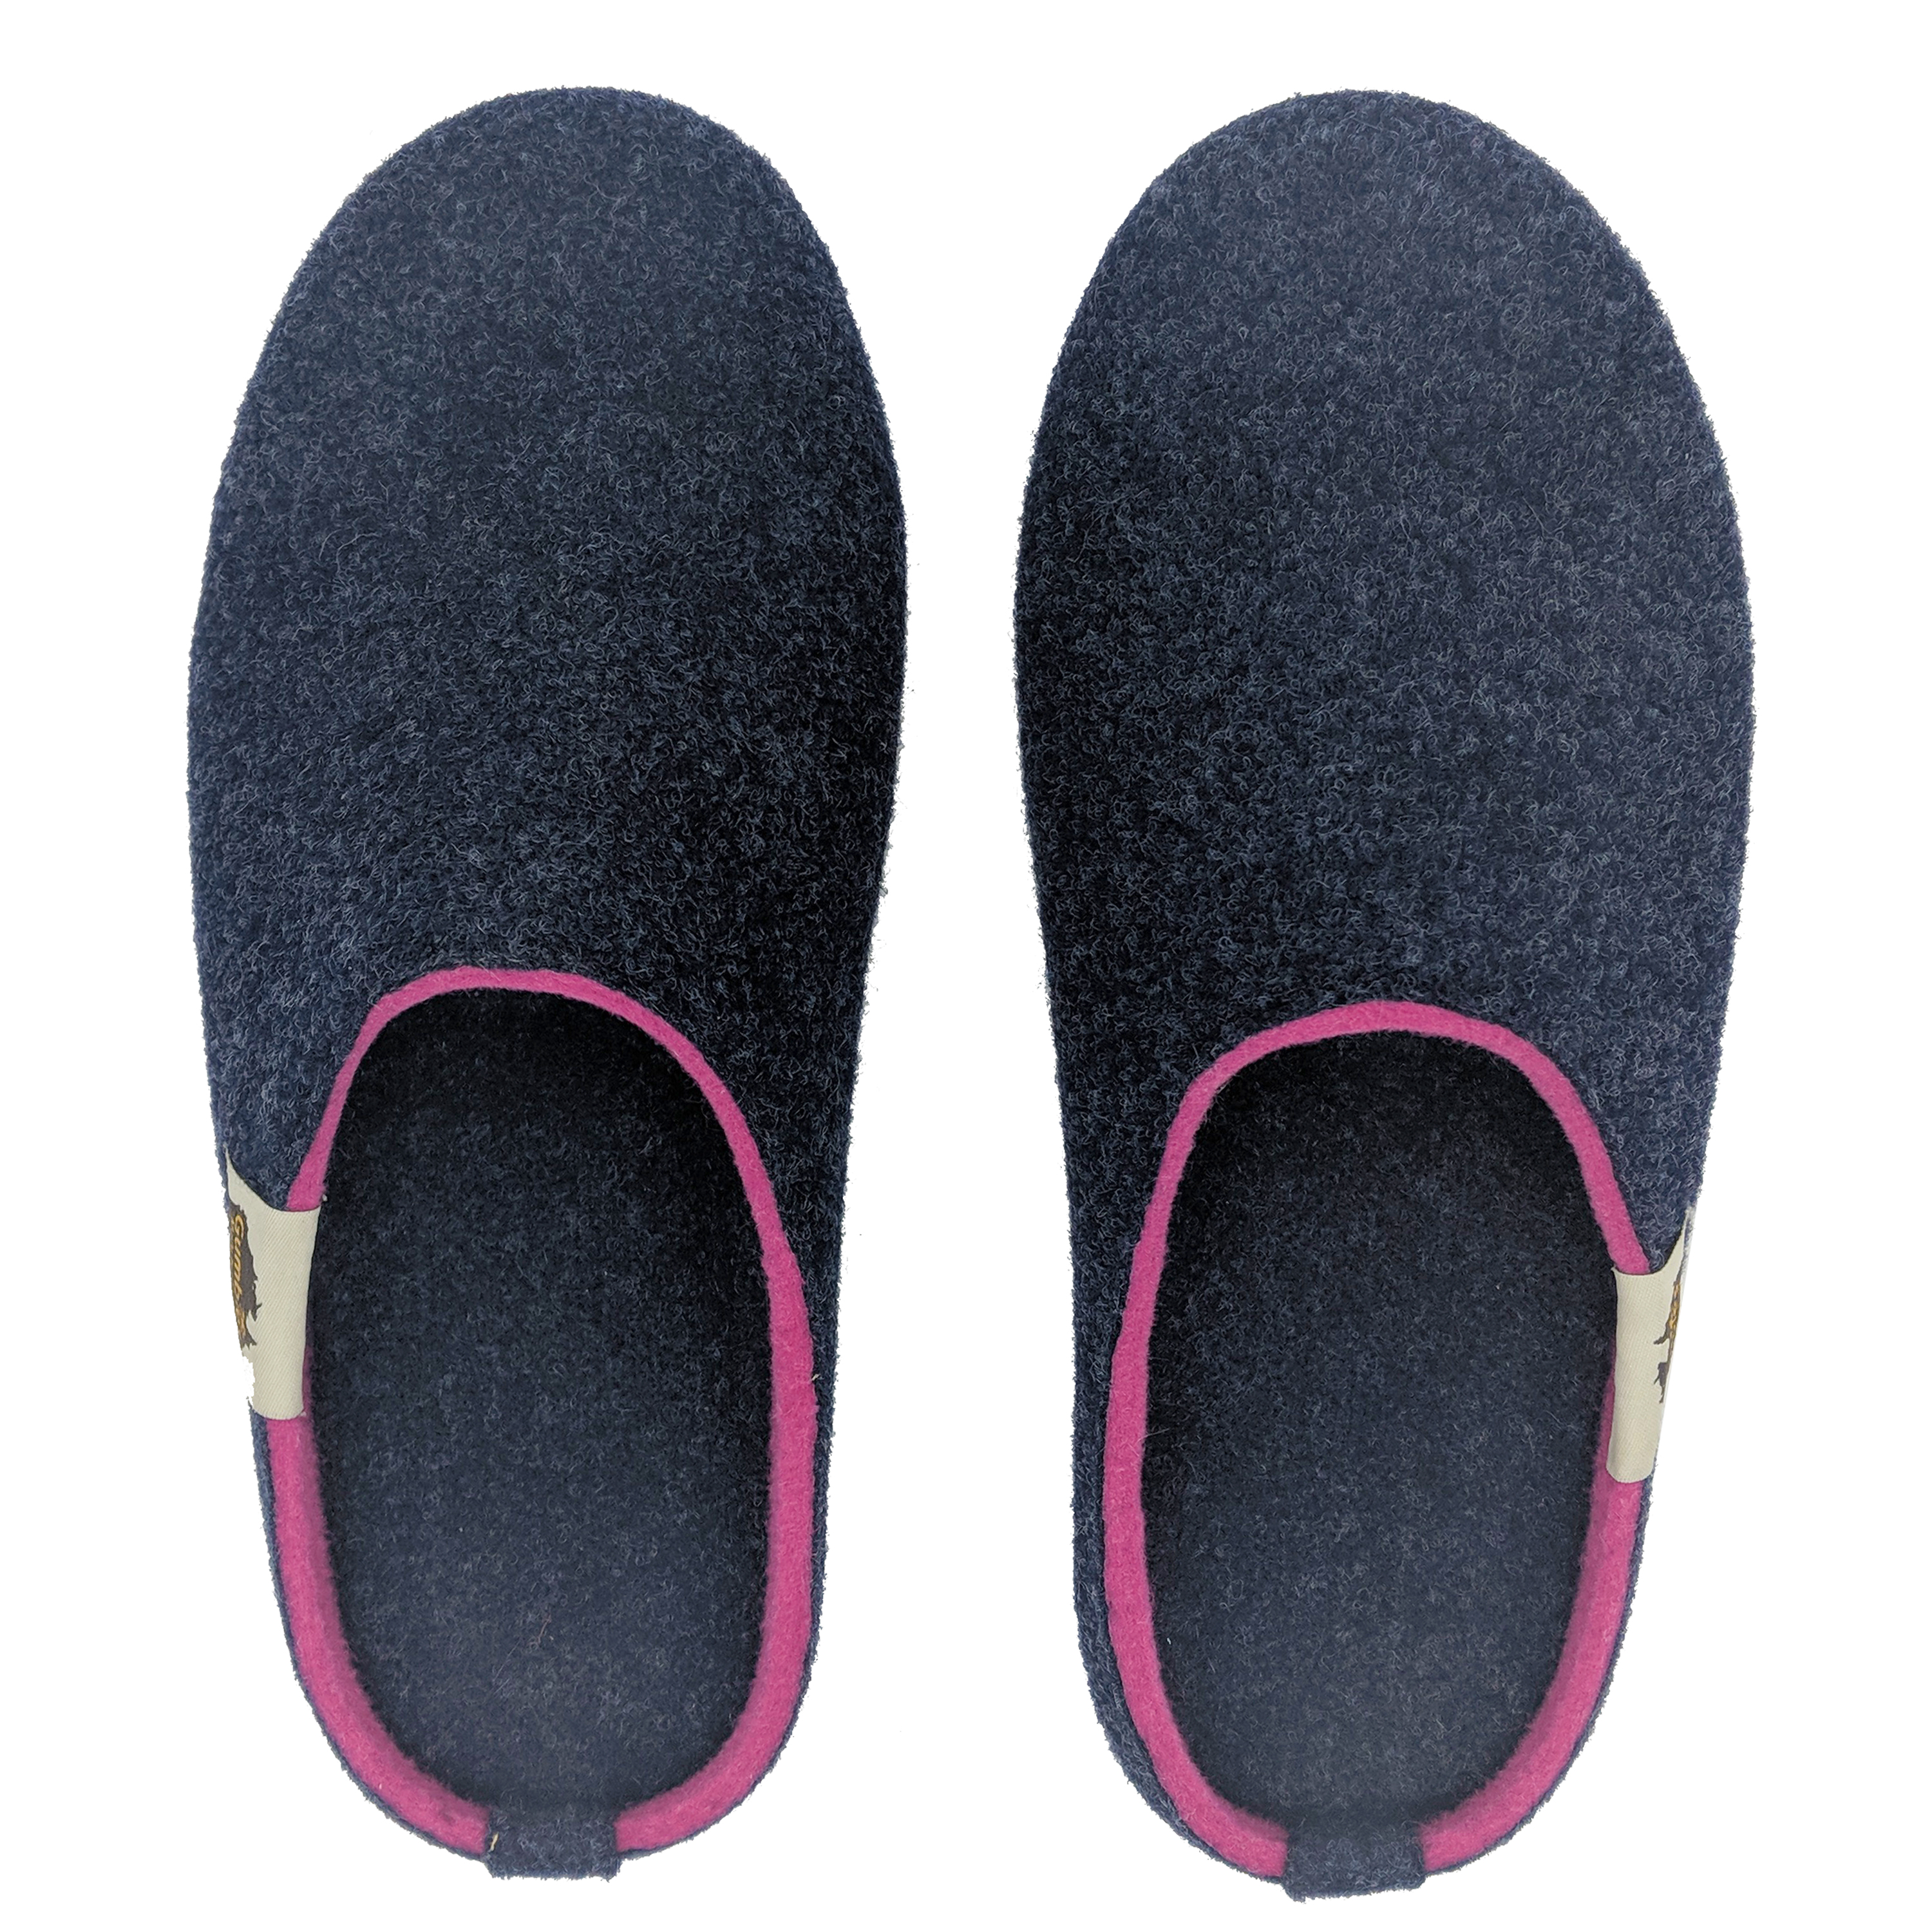 GUMBIES – Outback Slipper, NAVY-PINK